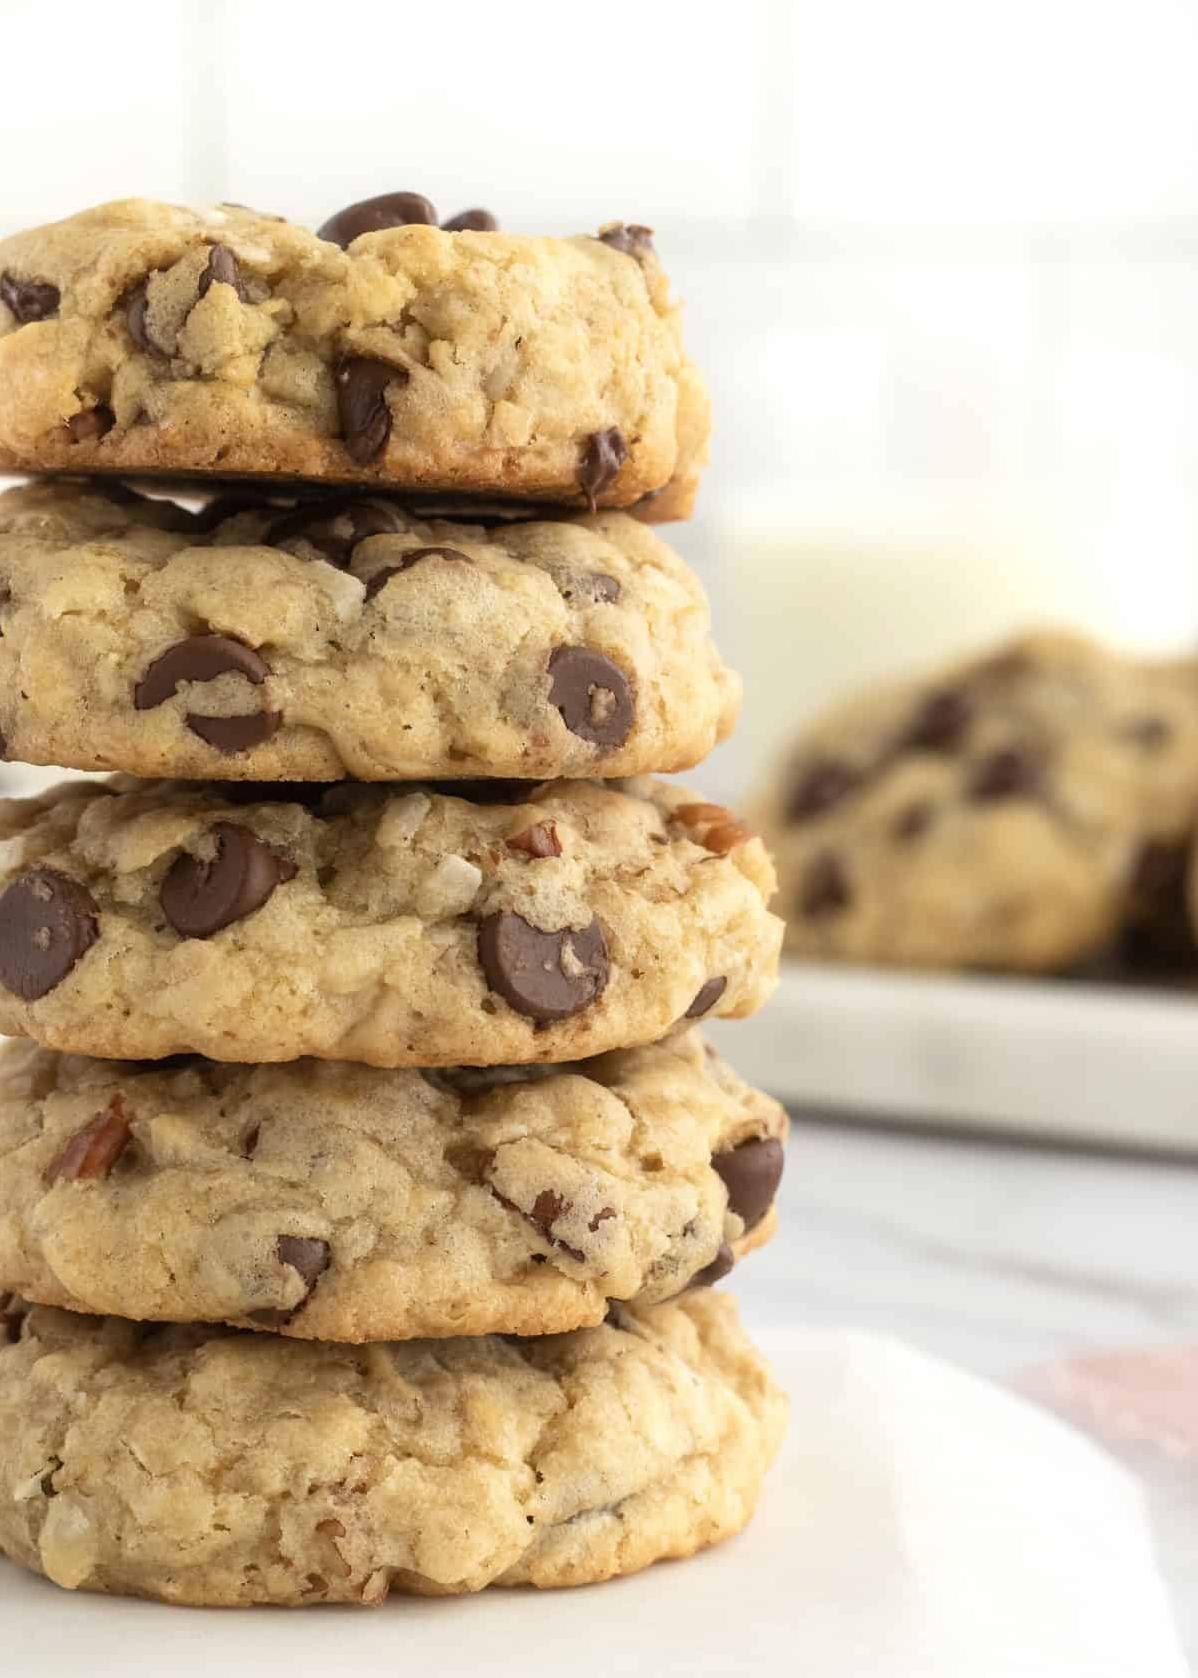  The aroma of fresh-baked cookies will have everyone lured to your kitchen in no time.